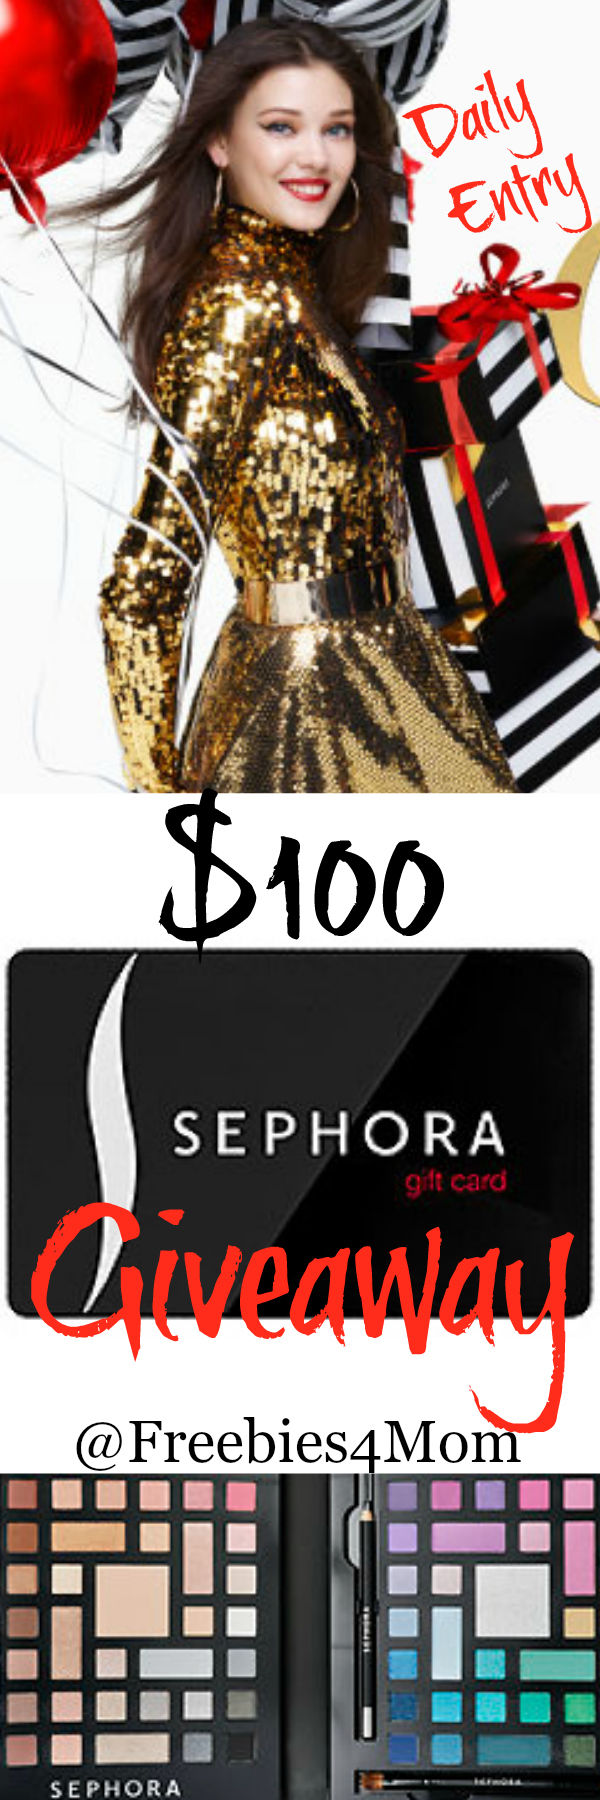 $100 Sephora Gift Card Giveaway